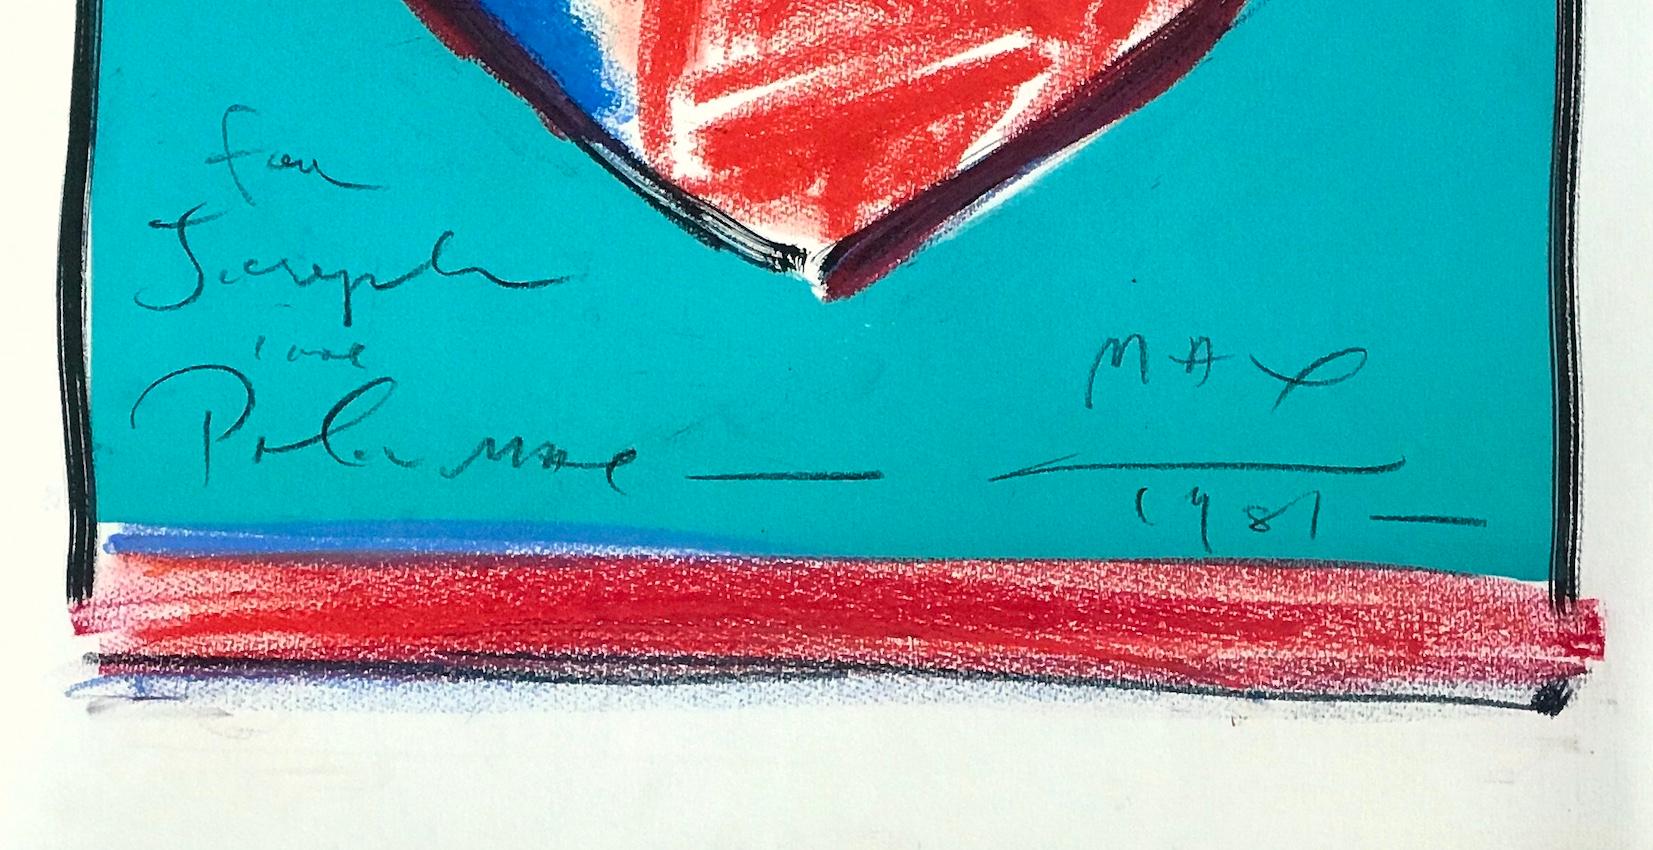 HEART II Signed Hand Colored Lithograph, Love Symbol, Red, Yellow, Turquoise - Pop Art Mixed Media Art by Peter Max